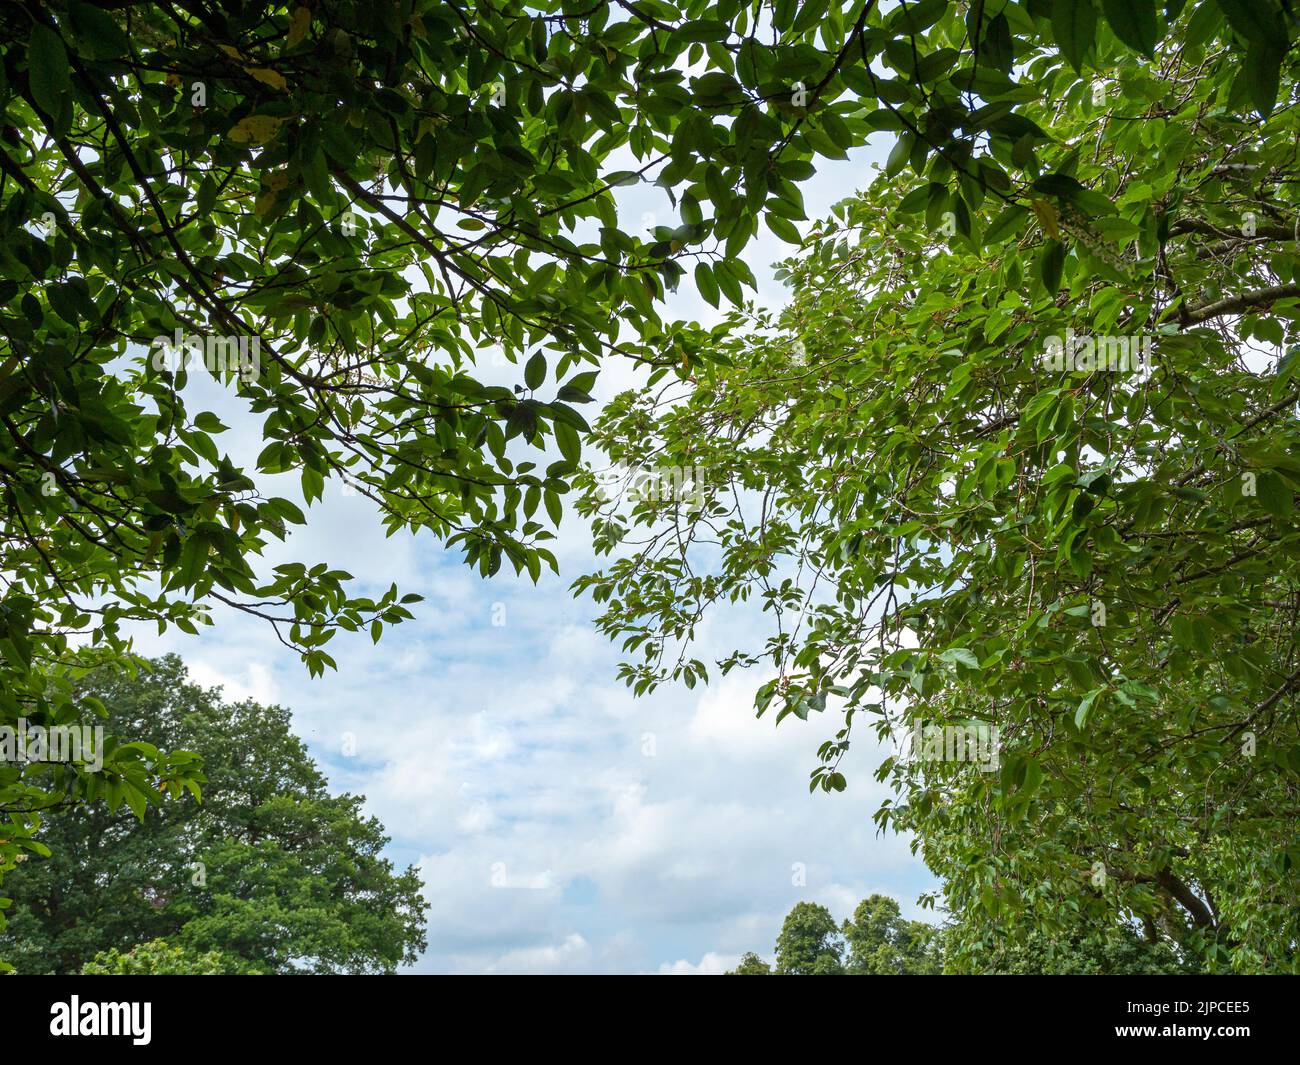 Looking through green foliage to a cloudy blue summer sky Stock Photo